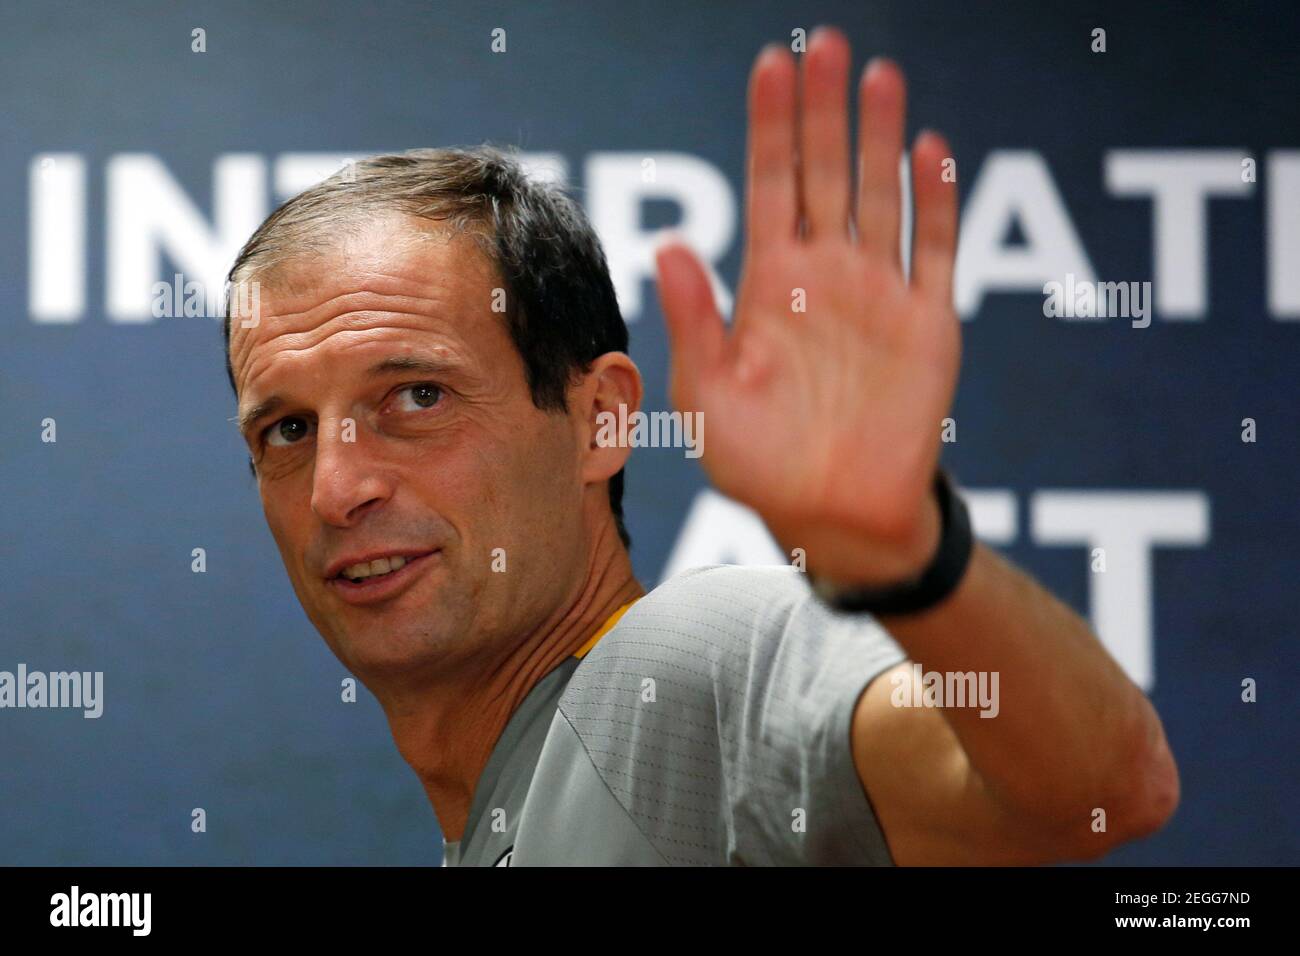 Football Soccer - Juventus news conference - International Challenge Cup - Hong Kong, China - 29/7/16 - Juventus team manager Massimiliano Allegri waves.   Reuters/Bobby Yip   Picture Supplied by Action Images Stock Photo